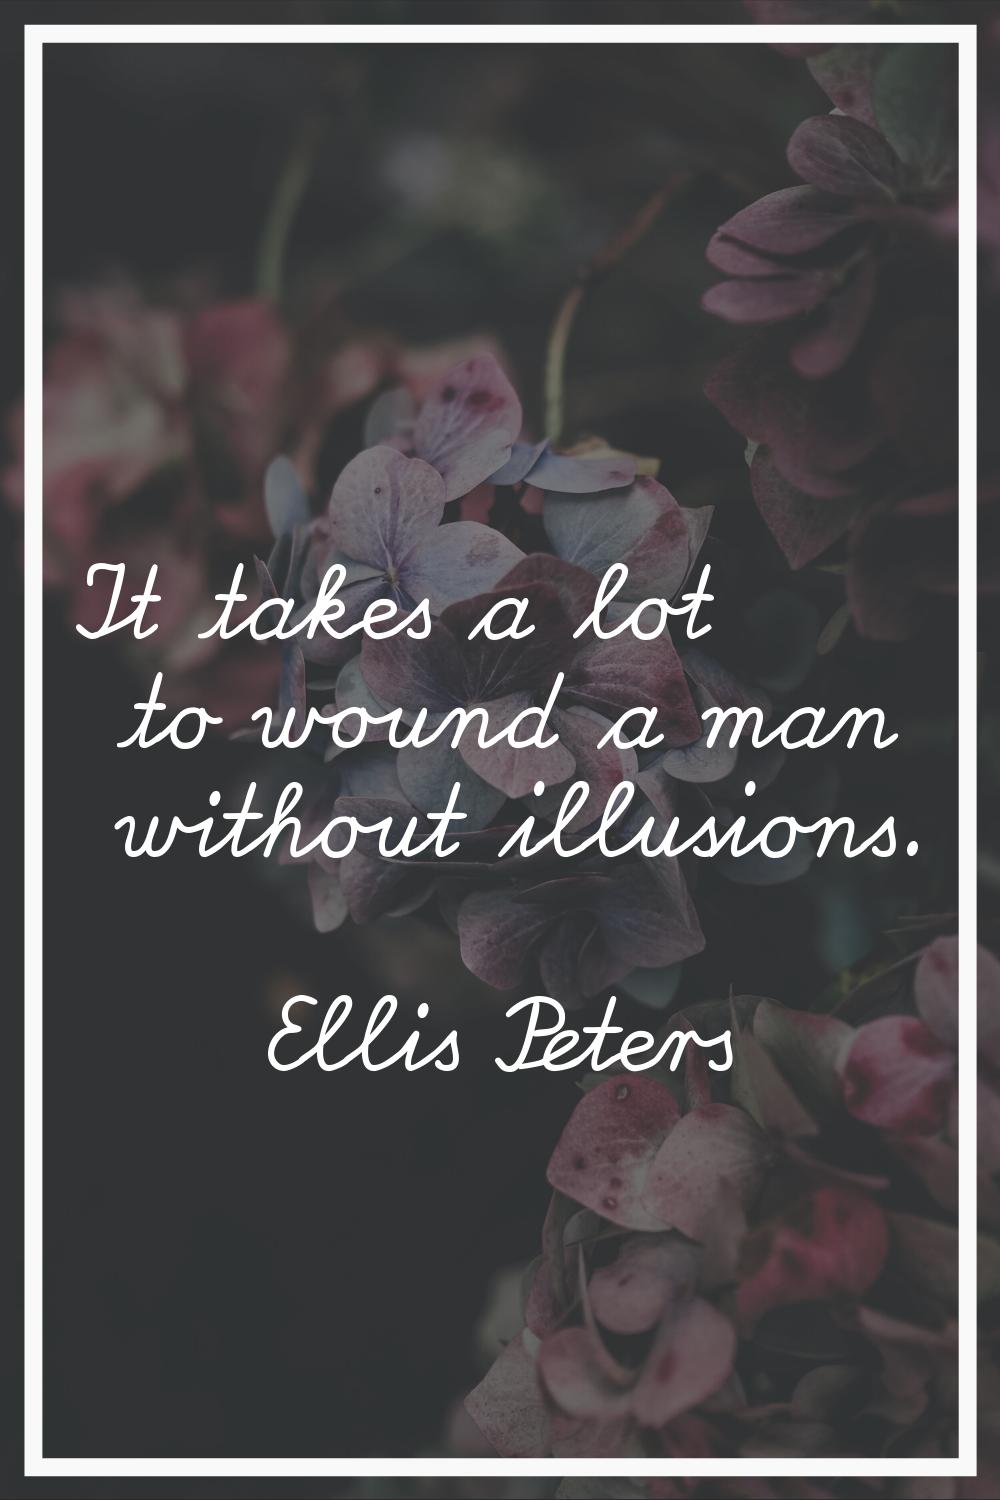 It takes a lot to wound a man without illusions.